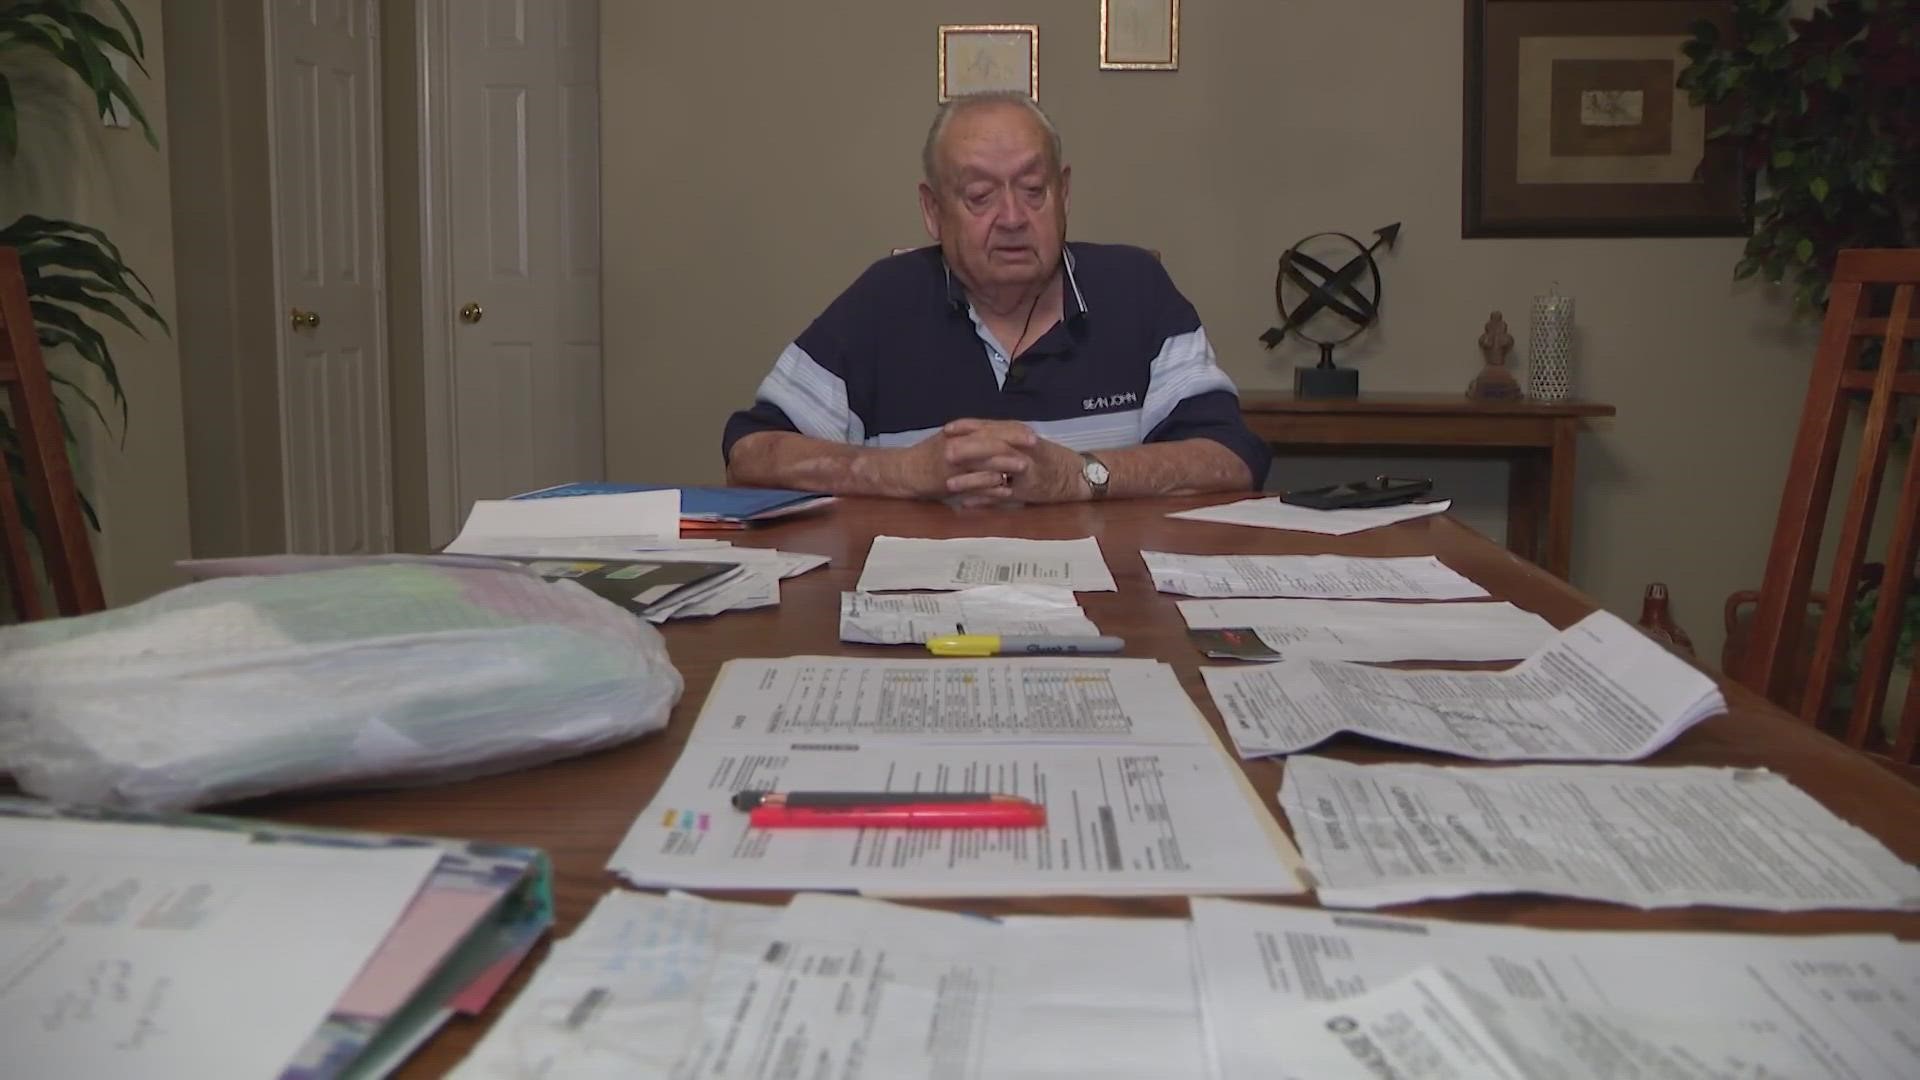 Joe Whitten wasn't planning to buy cars, drain his bank accounts and move out of his Tomball home. But after helping a woman in need, that's exactly what happened.